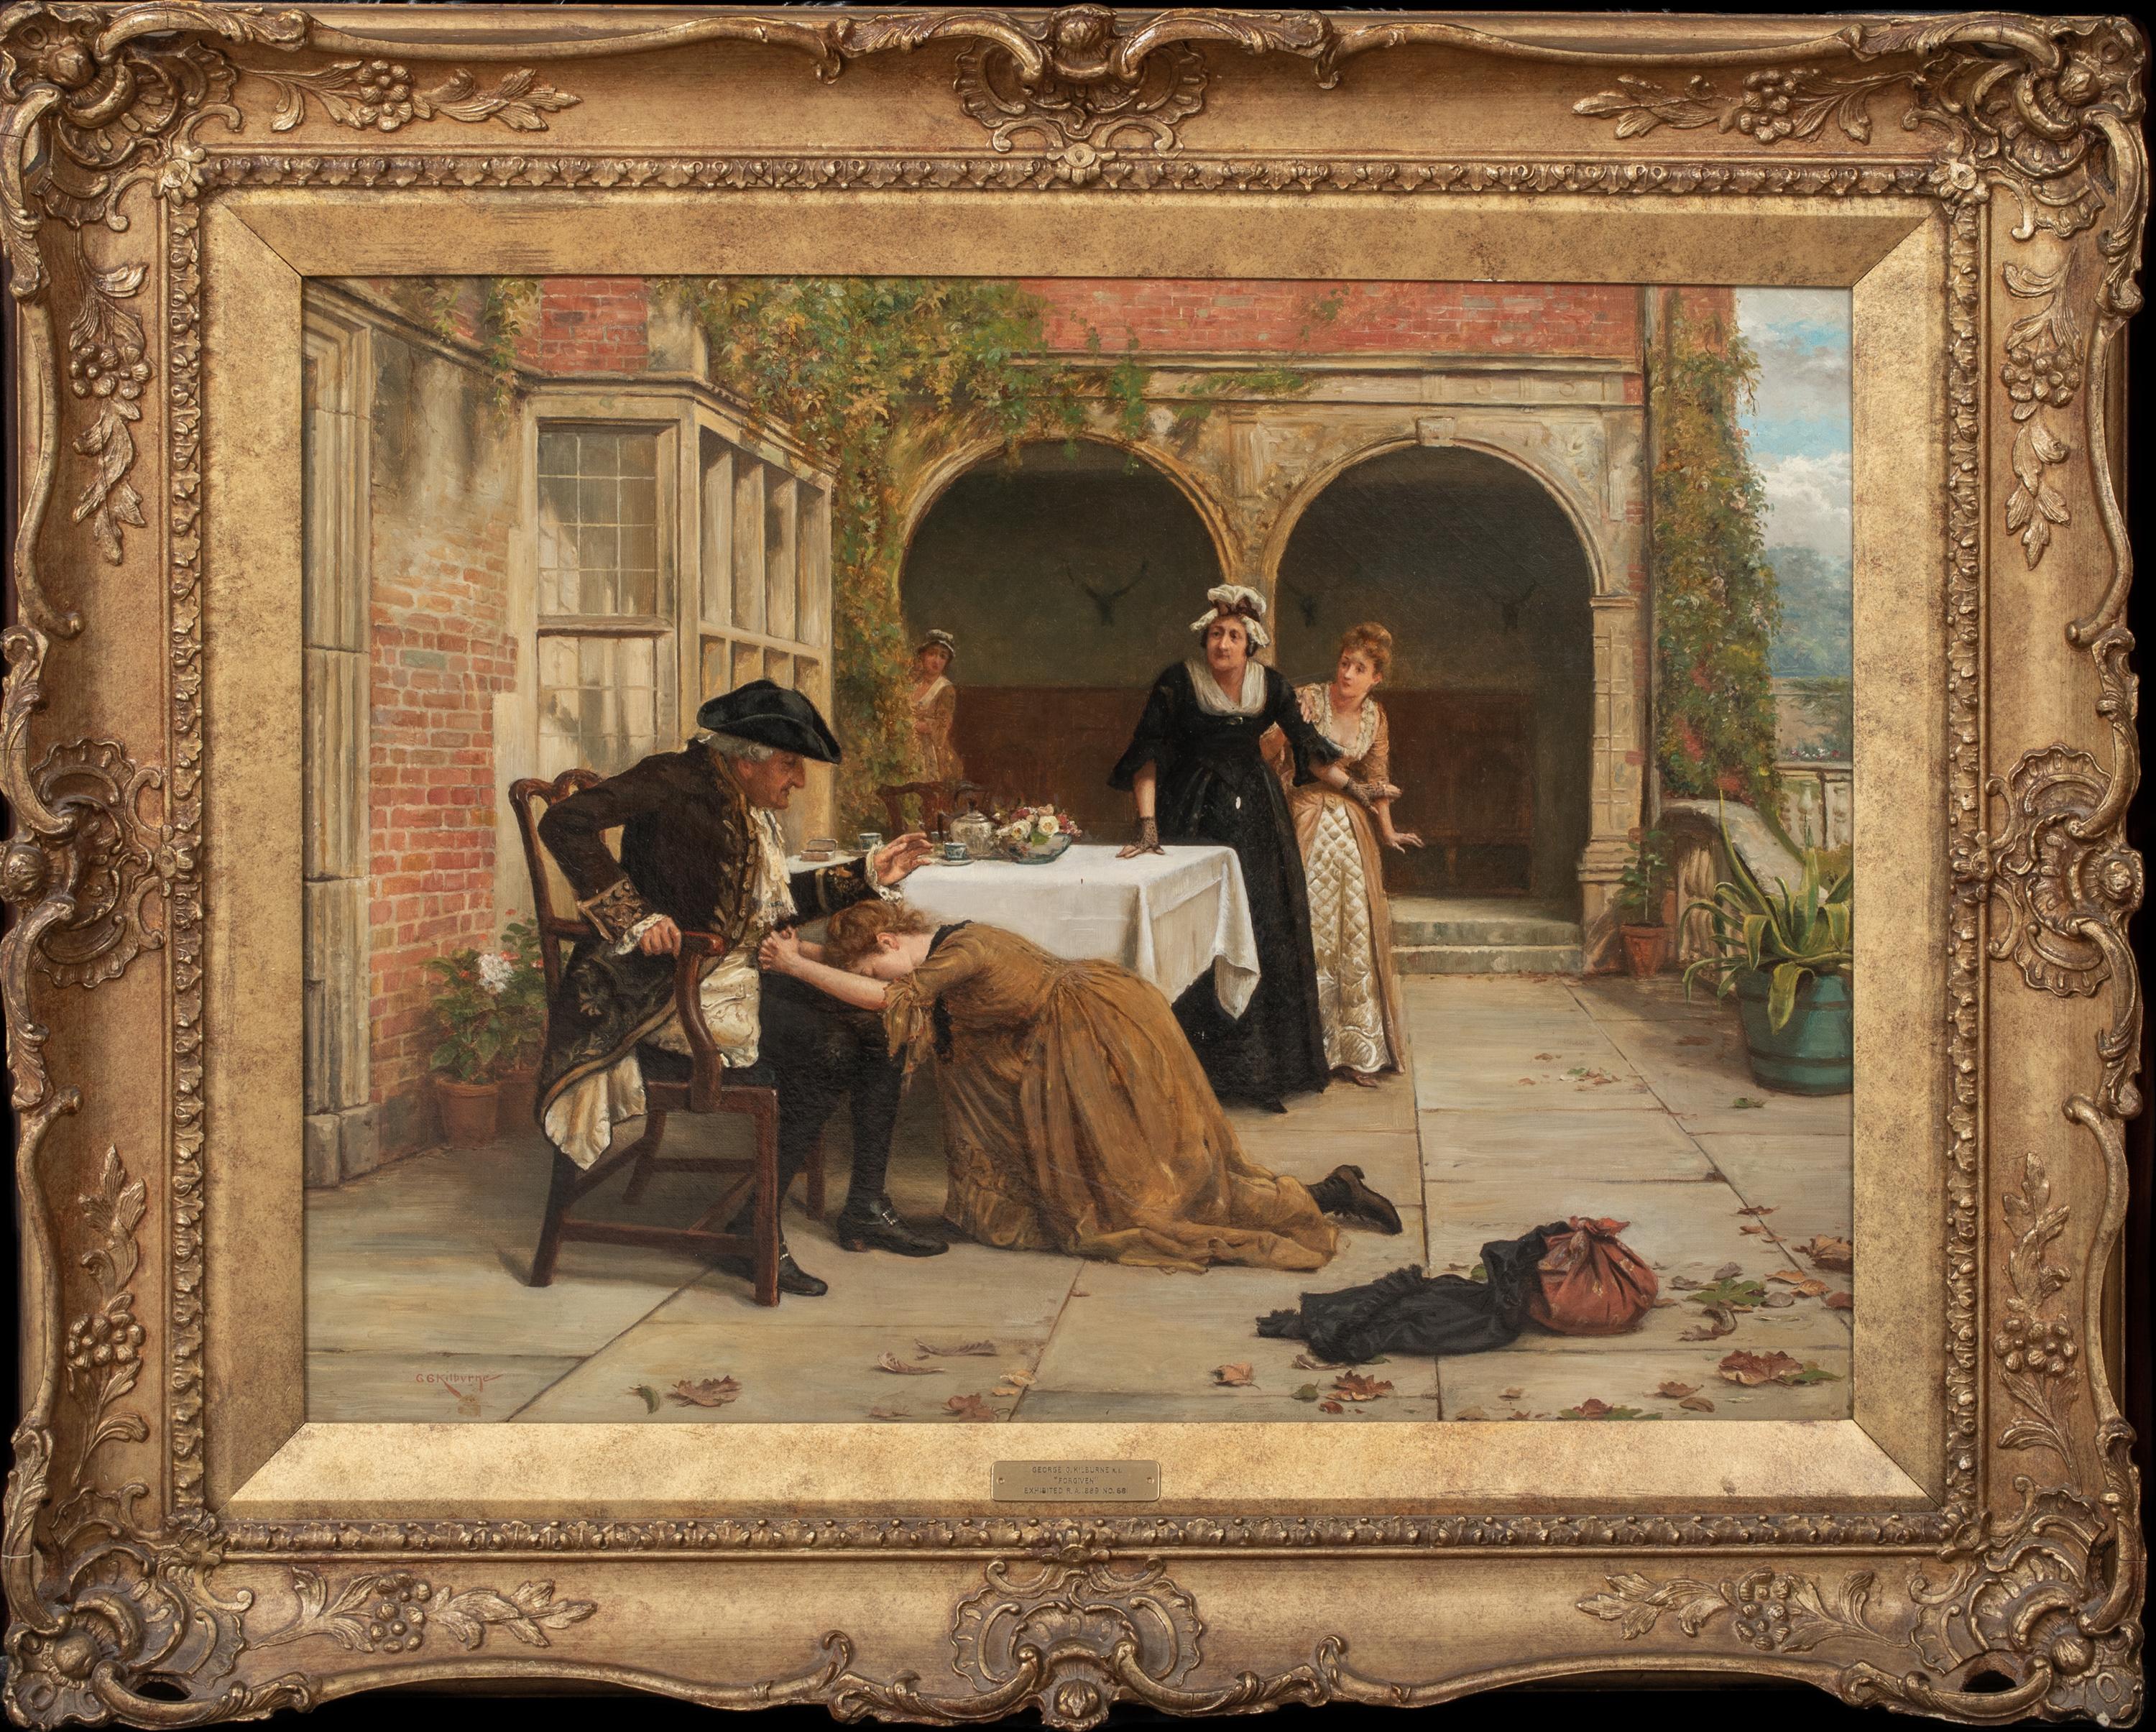 Forgiveness, 19th Century

by George Goodwin Kilburne (1839-1924) to $35,000

Large 19th Century English scene of a returning daughter pleading her father for forgiveness, oil on canvas by George Goodwin Kilburne. Excellent quality and condition